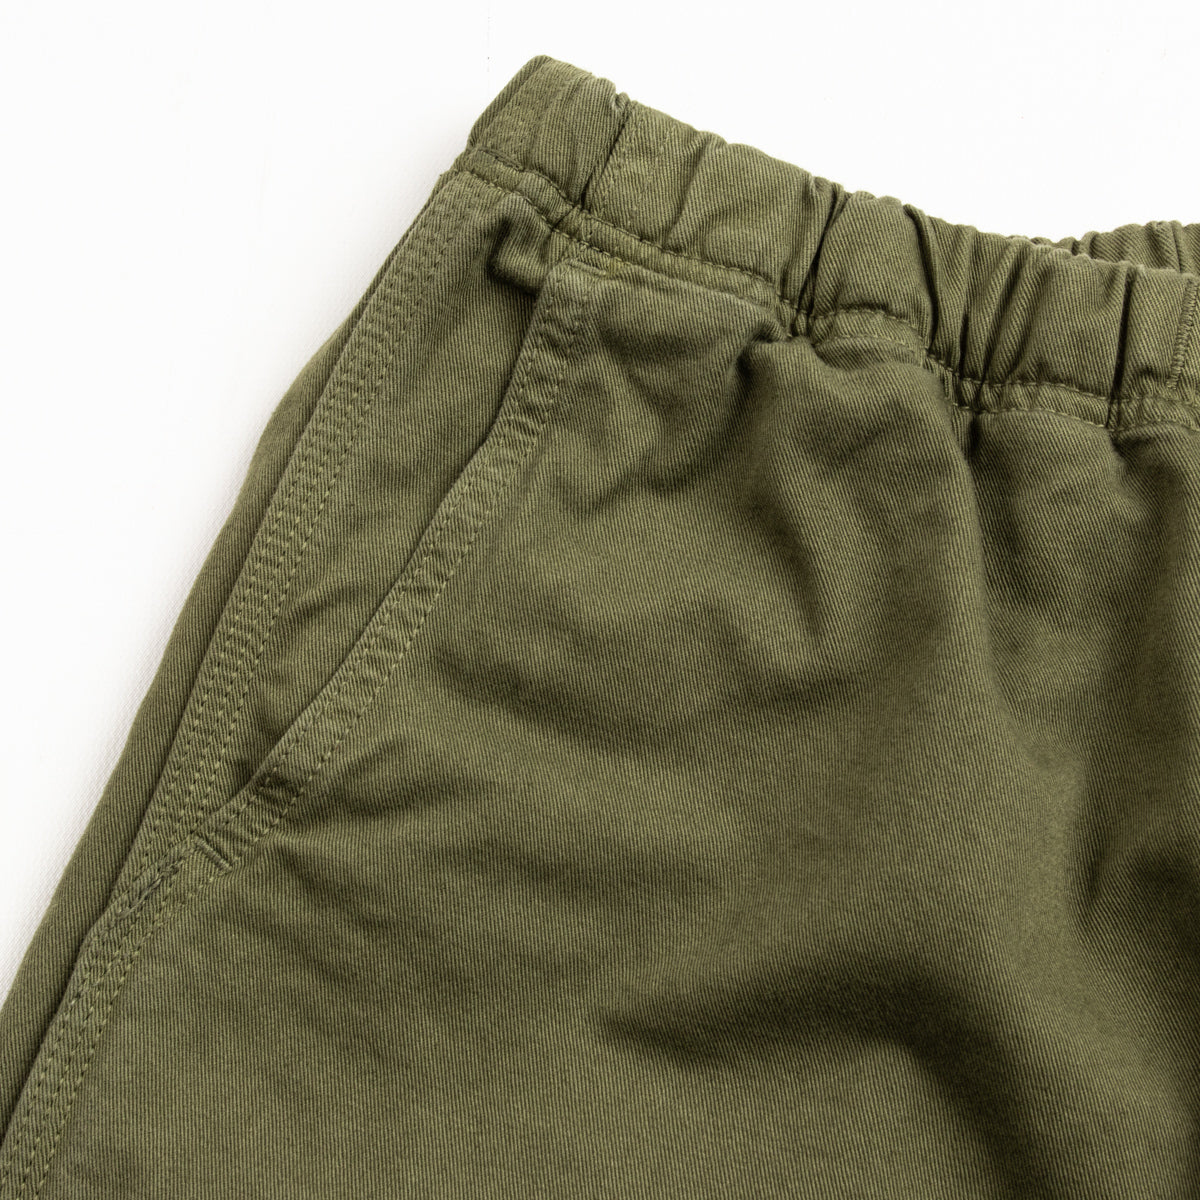 Climbers' Shorts (Over-Dyed) - Olive